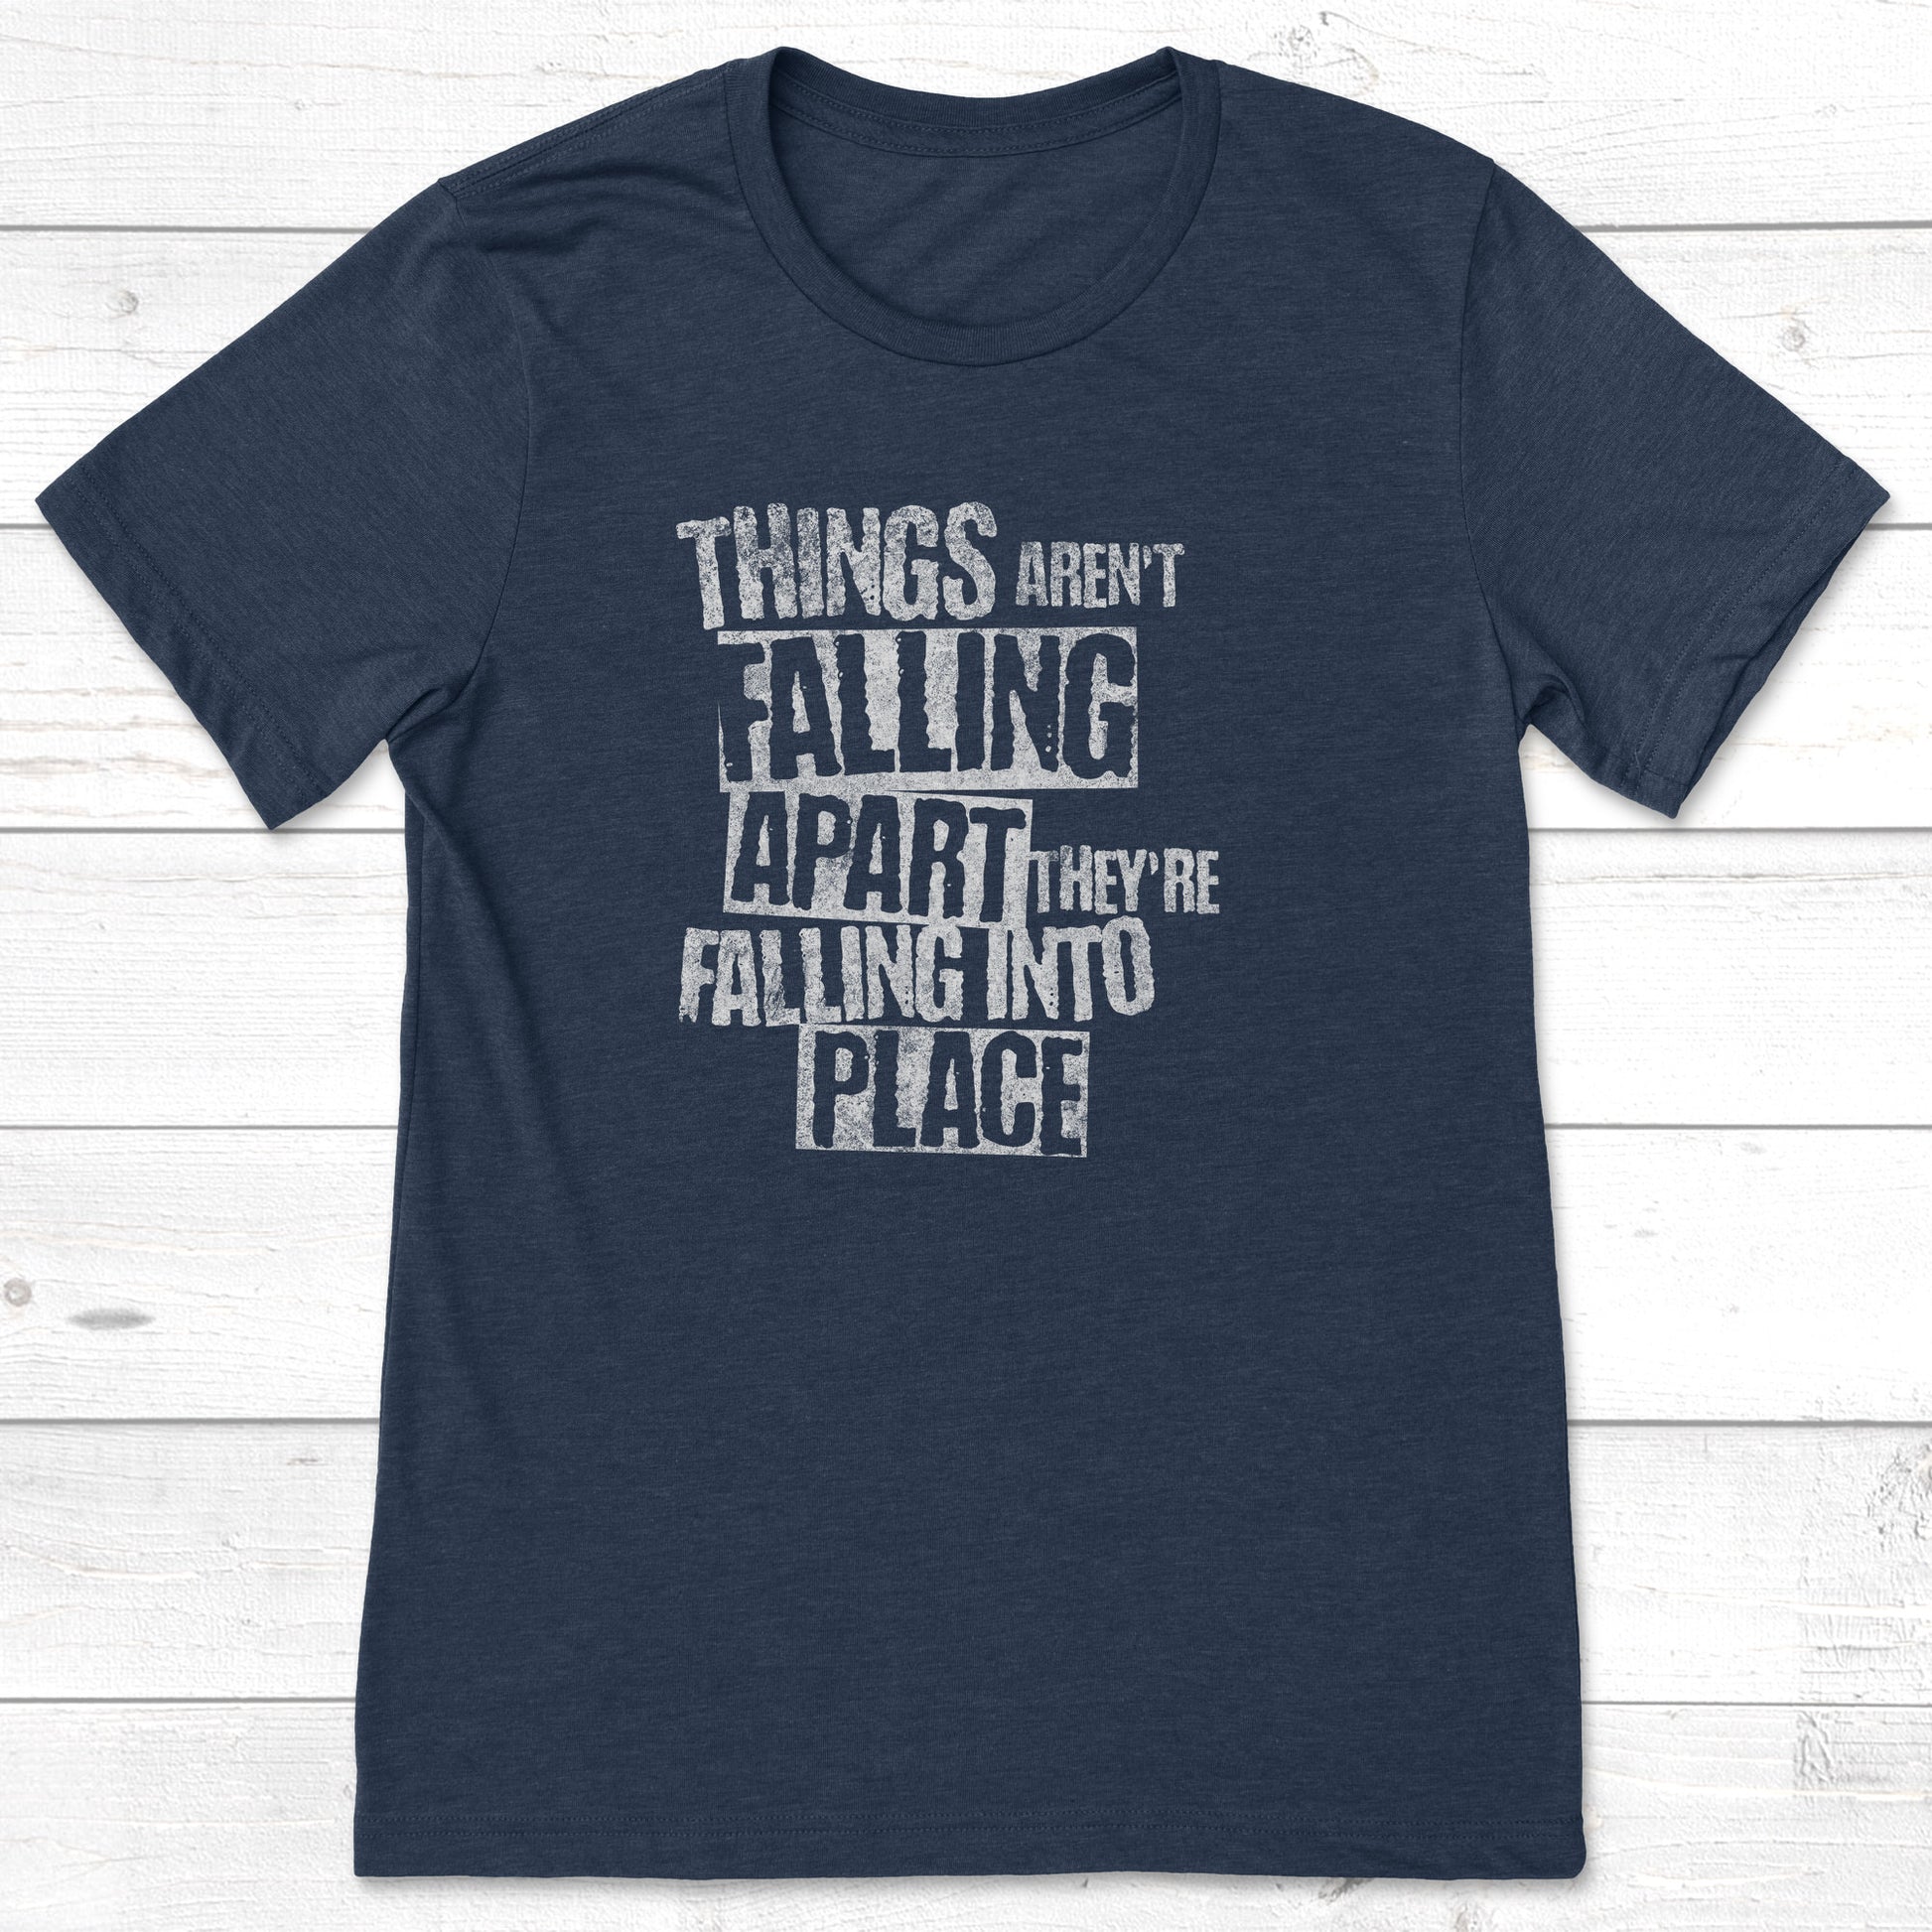 Things aren't falling apart they're falling into place t-shirt in heather navy